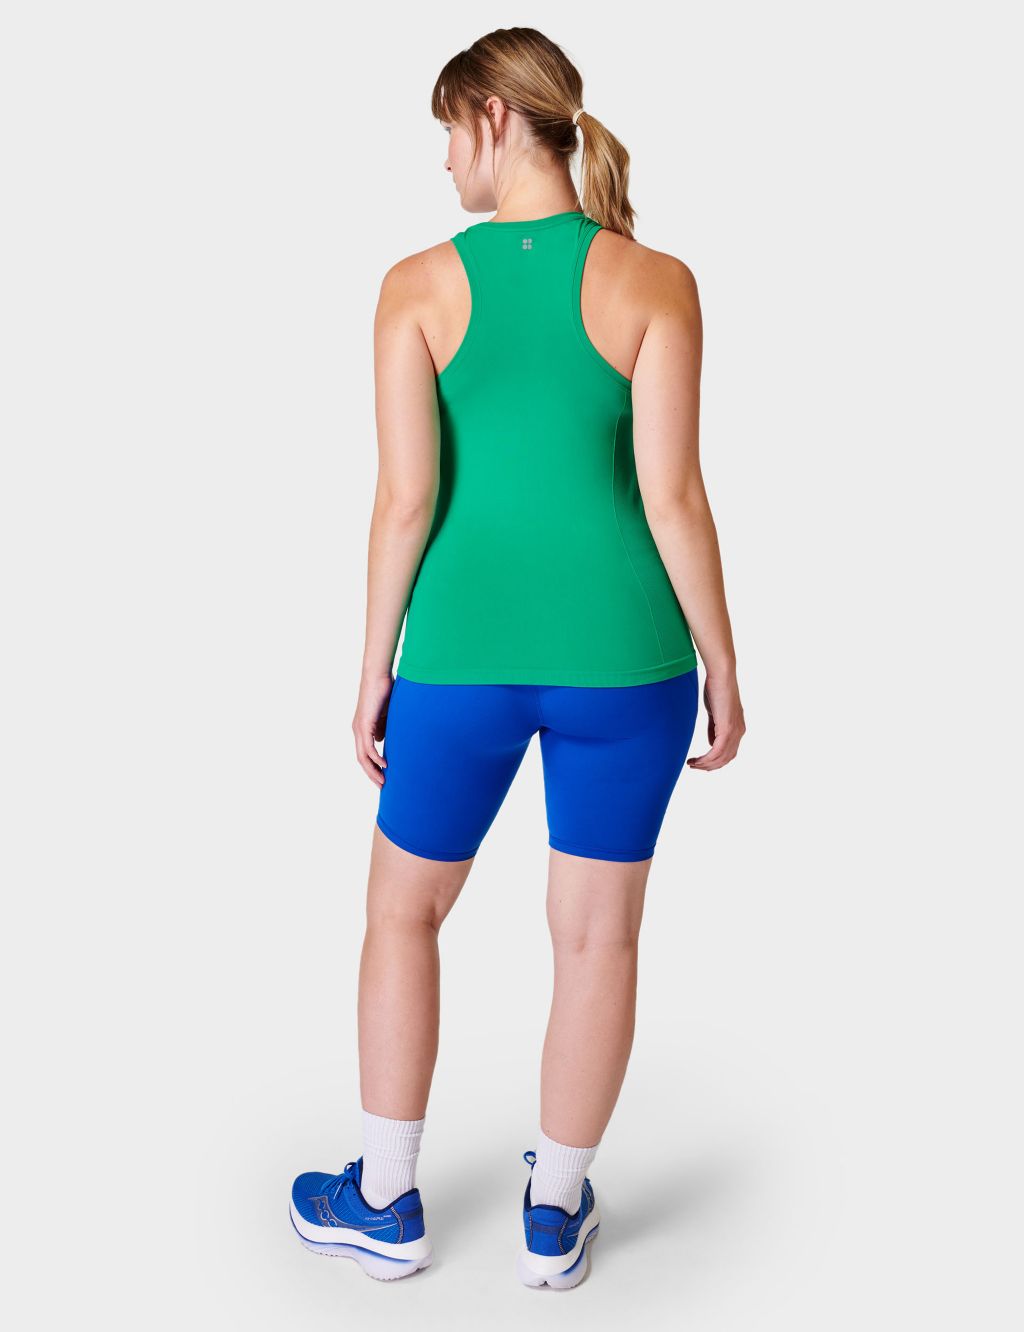 Athlete Seamless Fitted Vest Top image 3